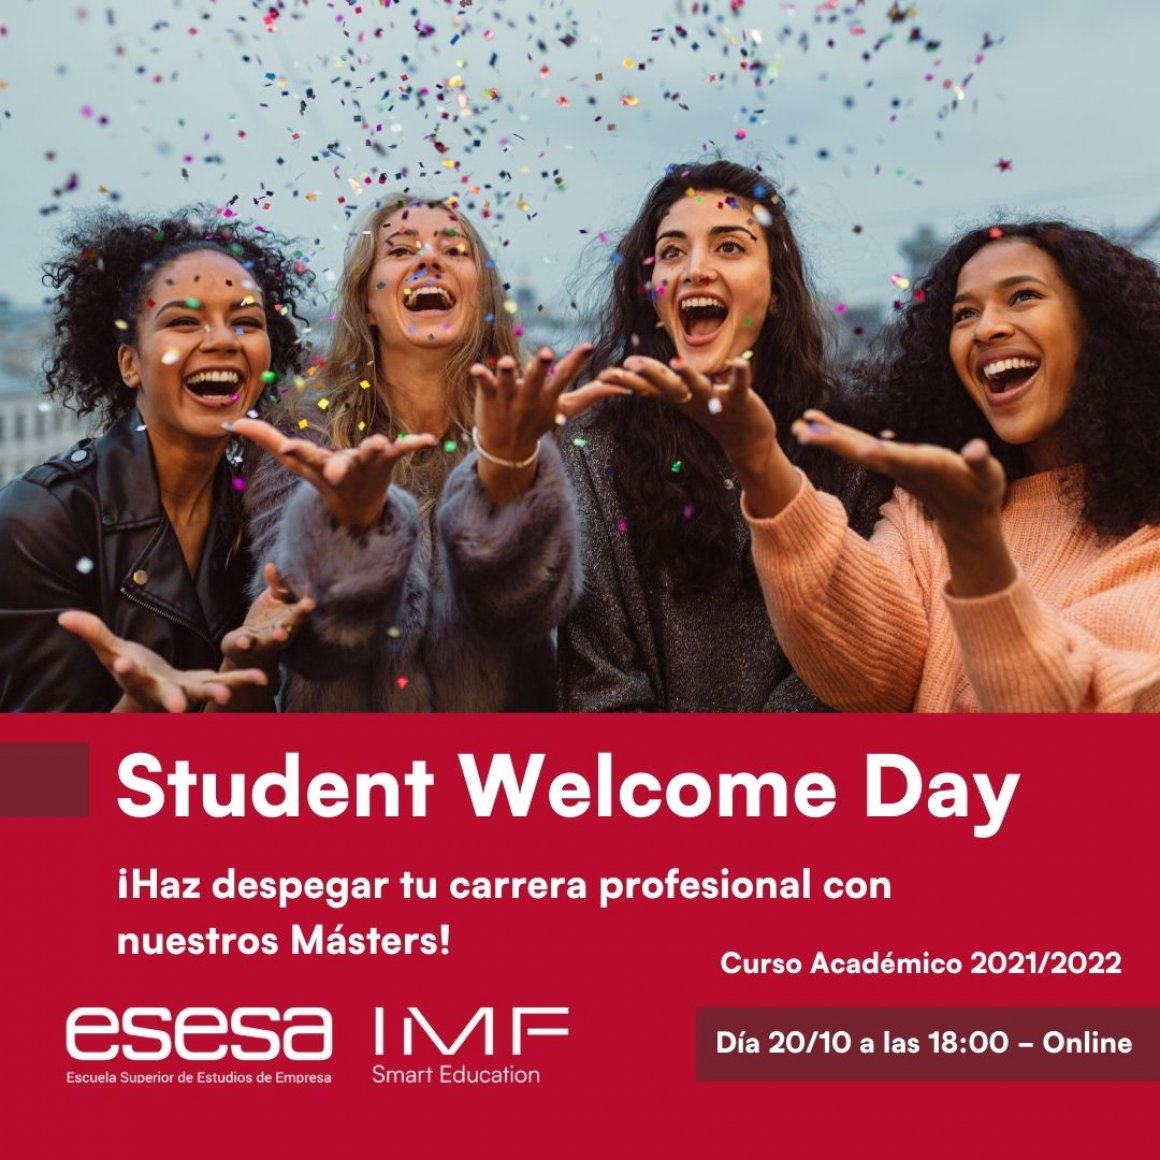 Student Welcome Day